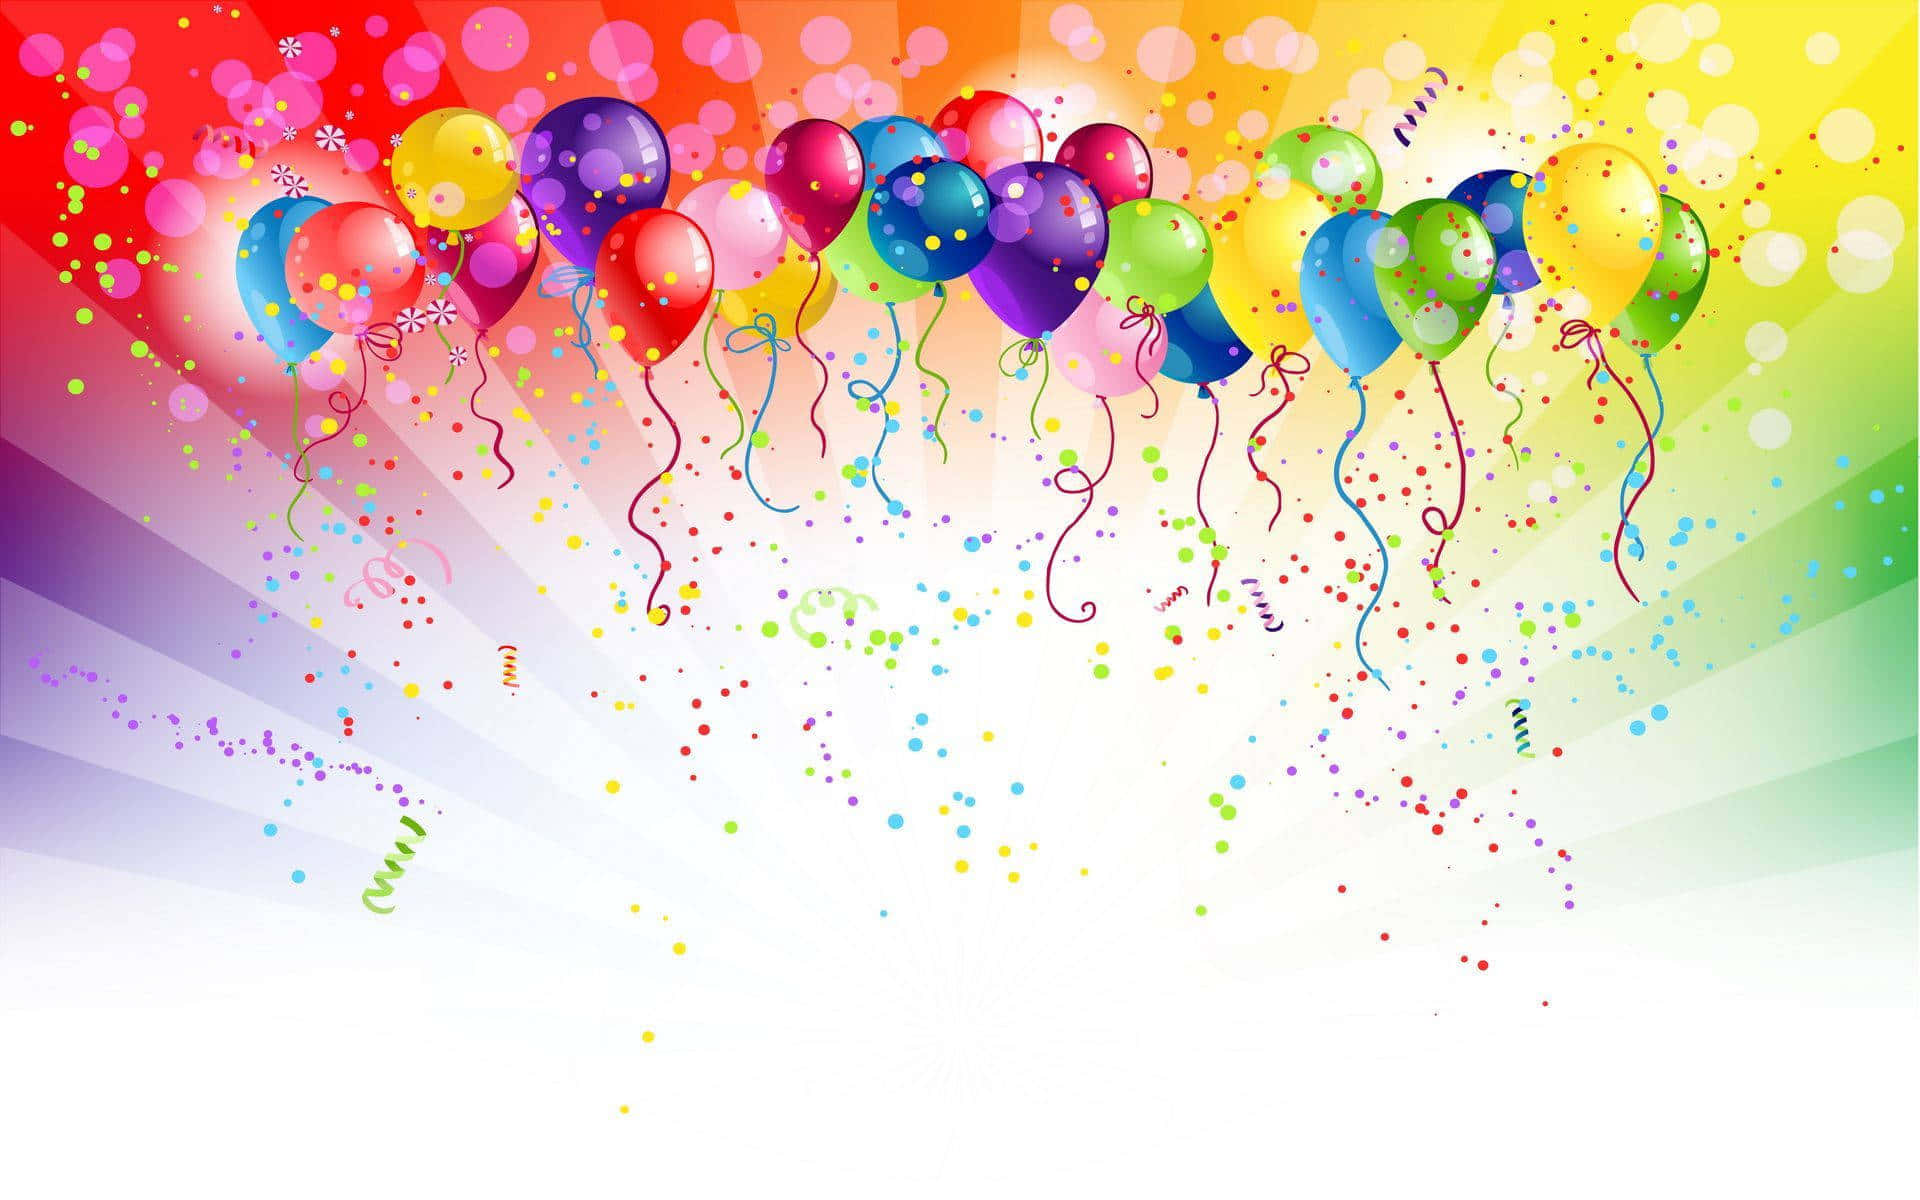 Colorful and joyous Birthday Balloons!